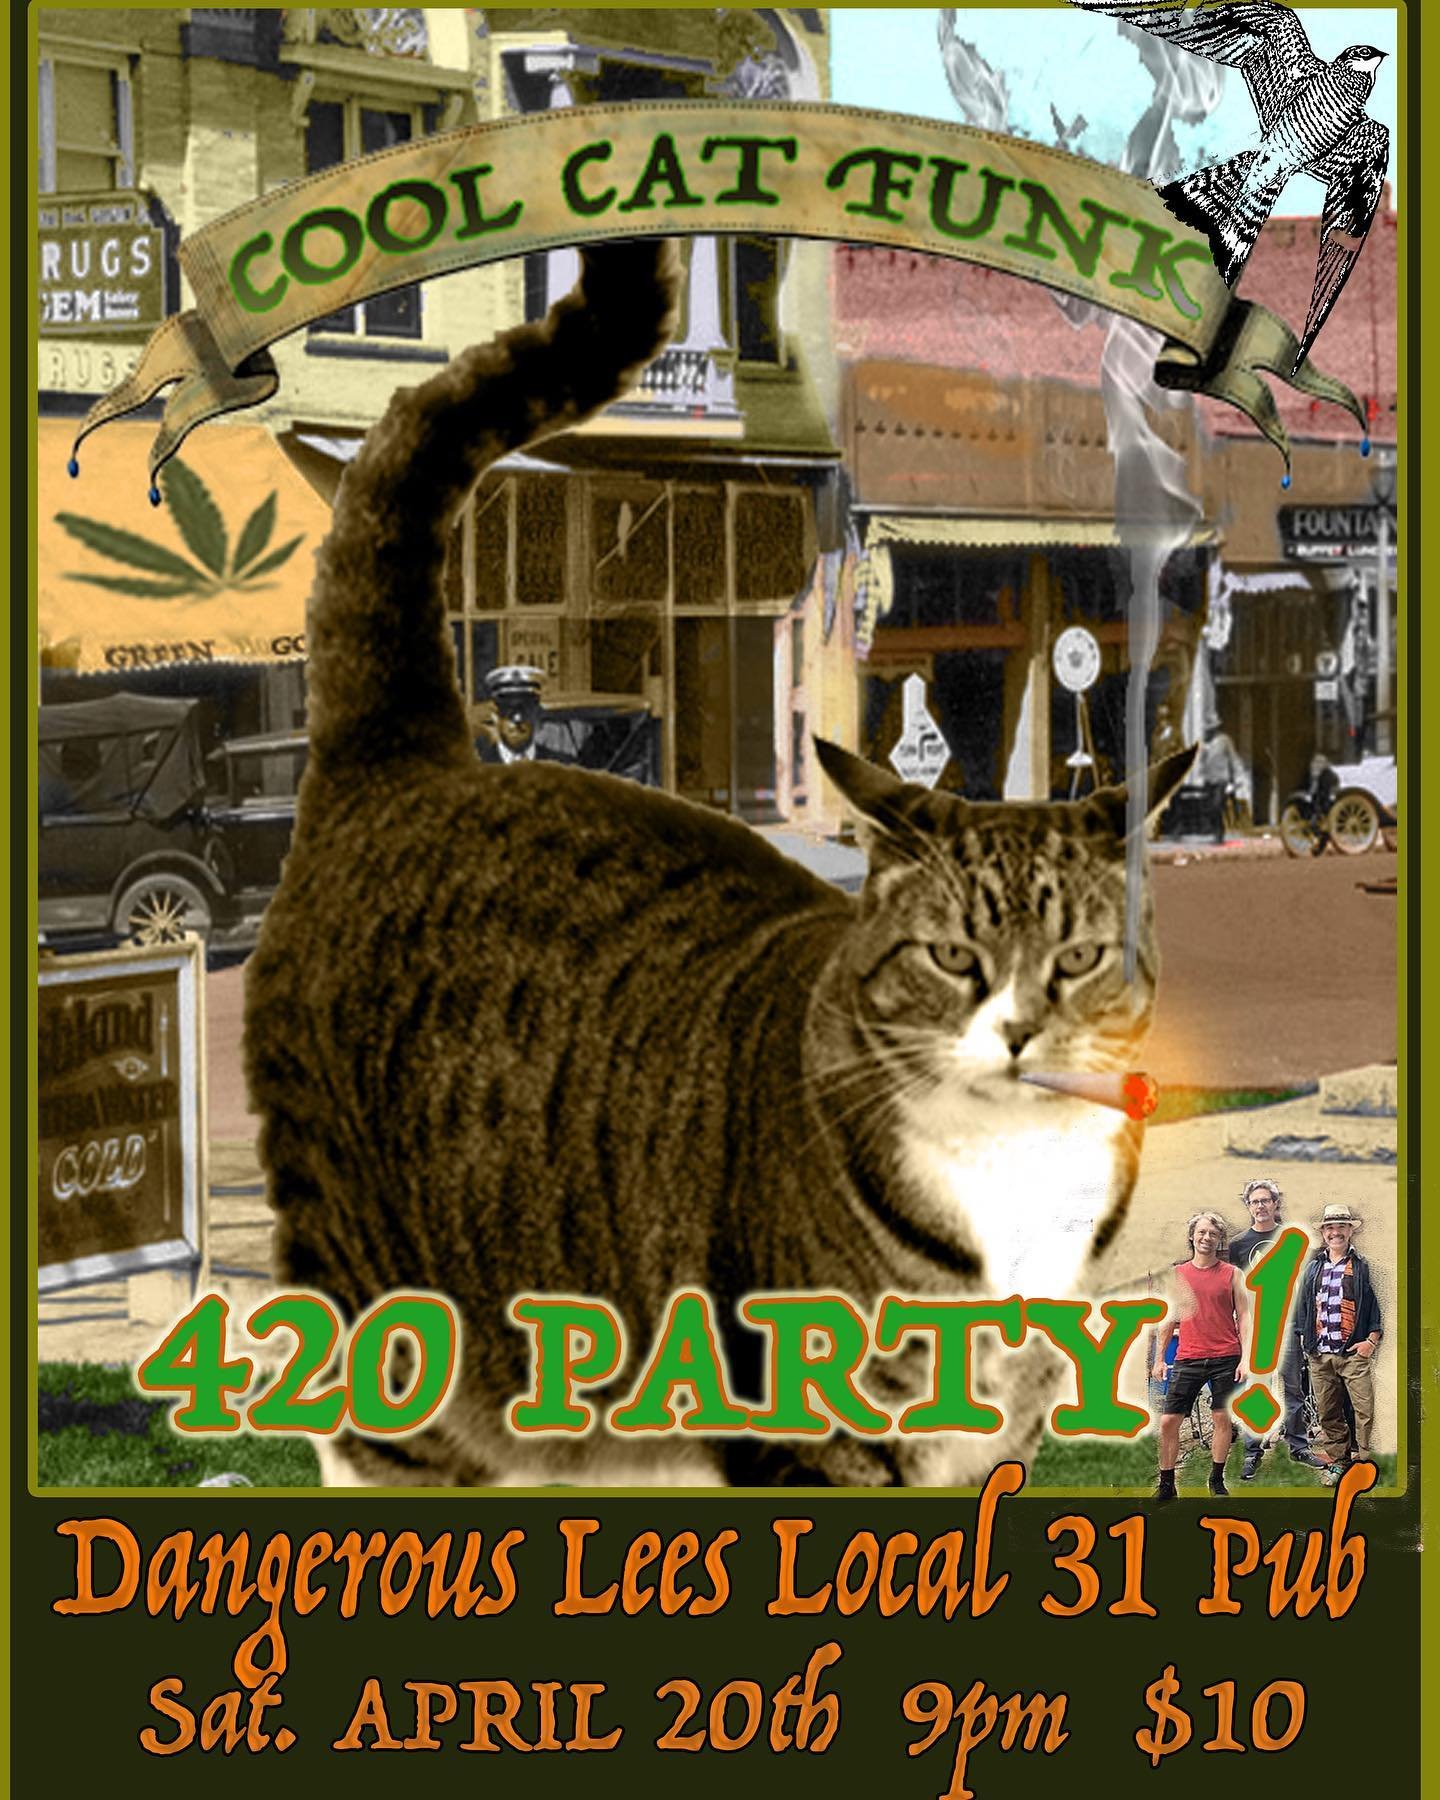 This 4/20,  We will be Live in Ashland town;  come on out and Blaze one to the Song with us @local31pub! 🔥⚡️🏝️😸. Wear your Cool Cat Funk shirt for half off at the door 🤙🏽
 

#southernoregonmusic 
#roguevalleyoregon 
#420
#coolcat
#dancing 
#blaz